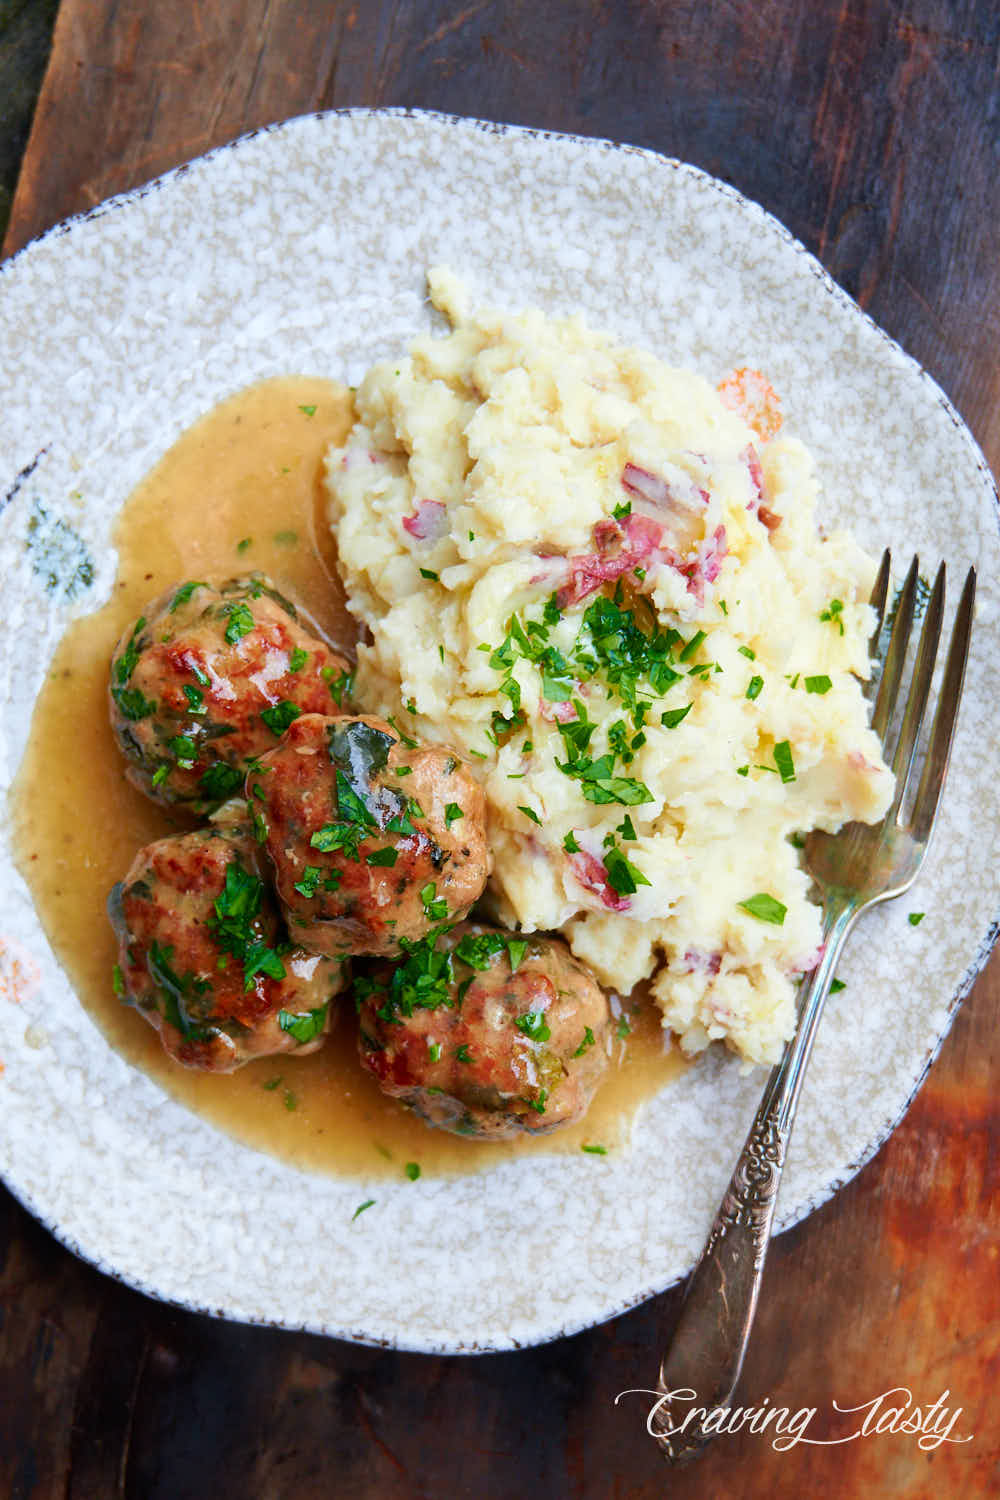 Turkey meatballs on a plate with mashed potatoes and gravy.